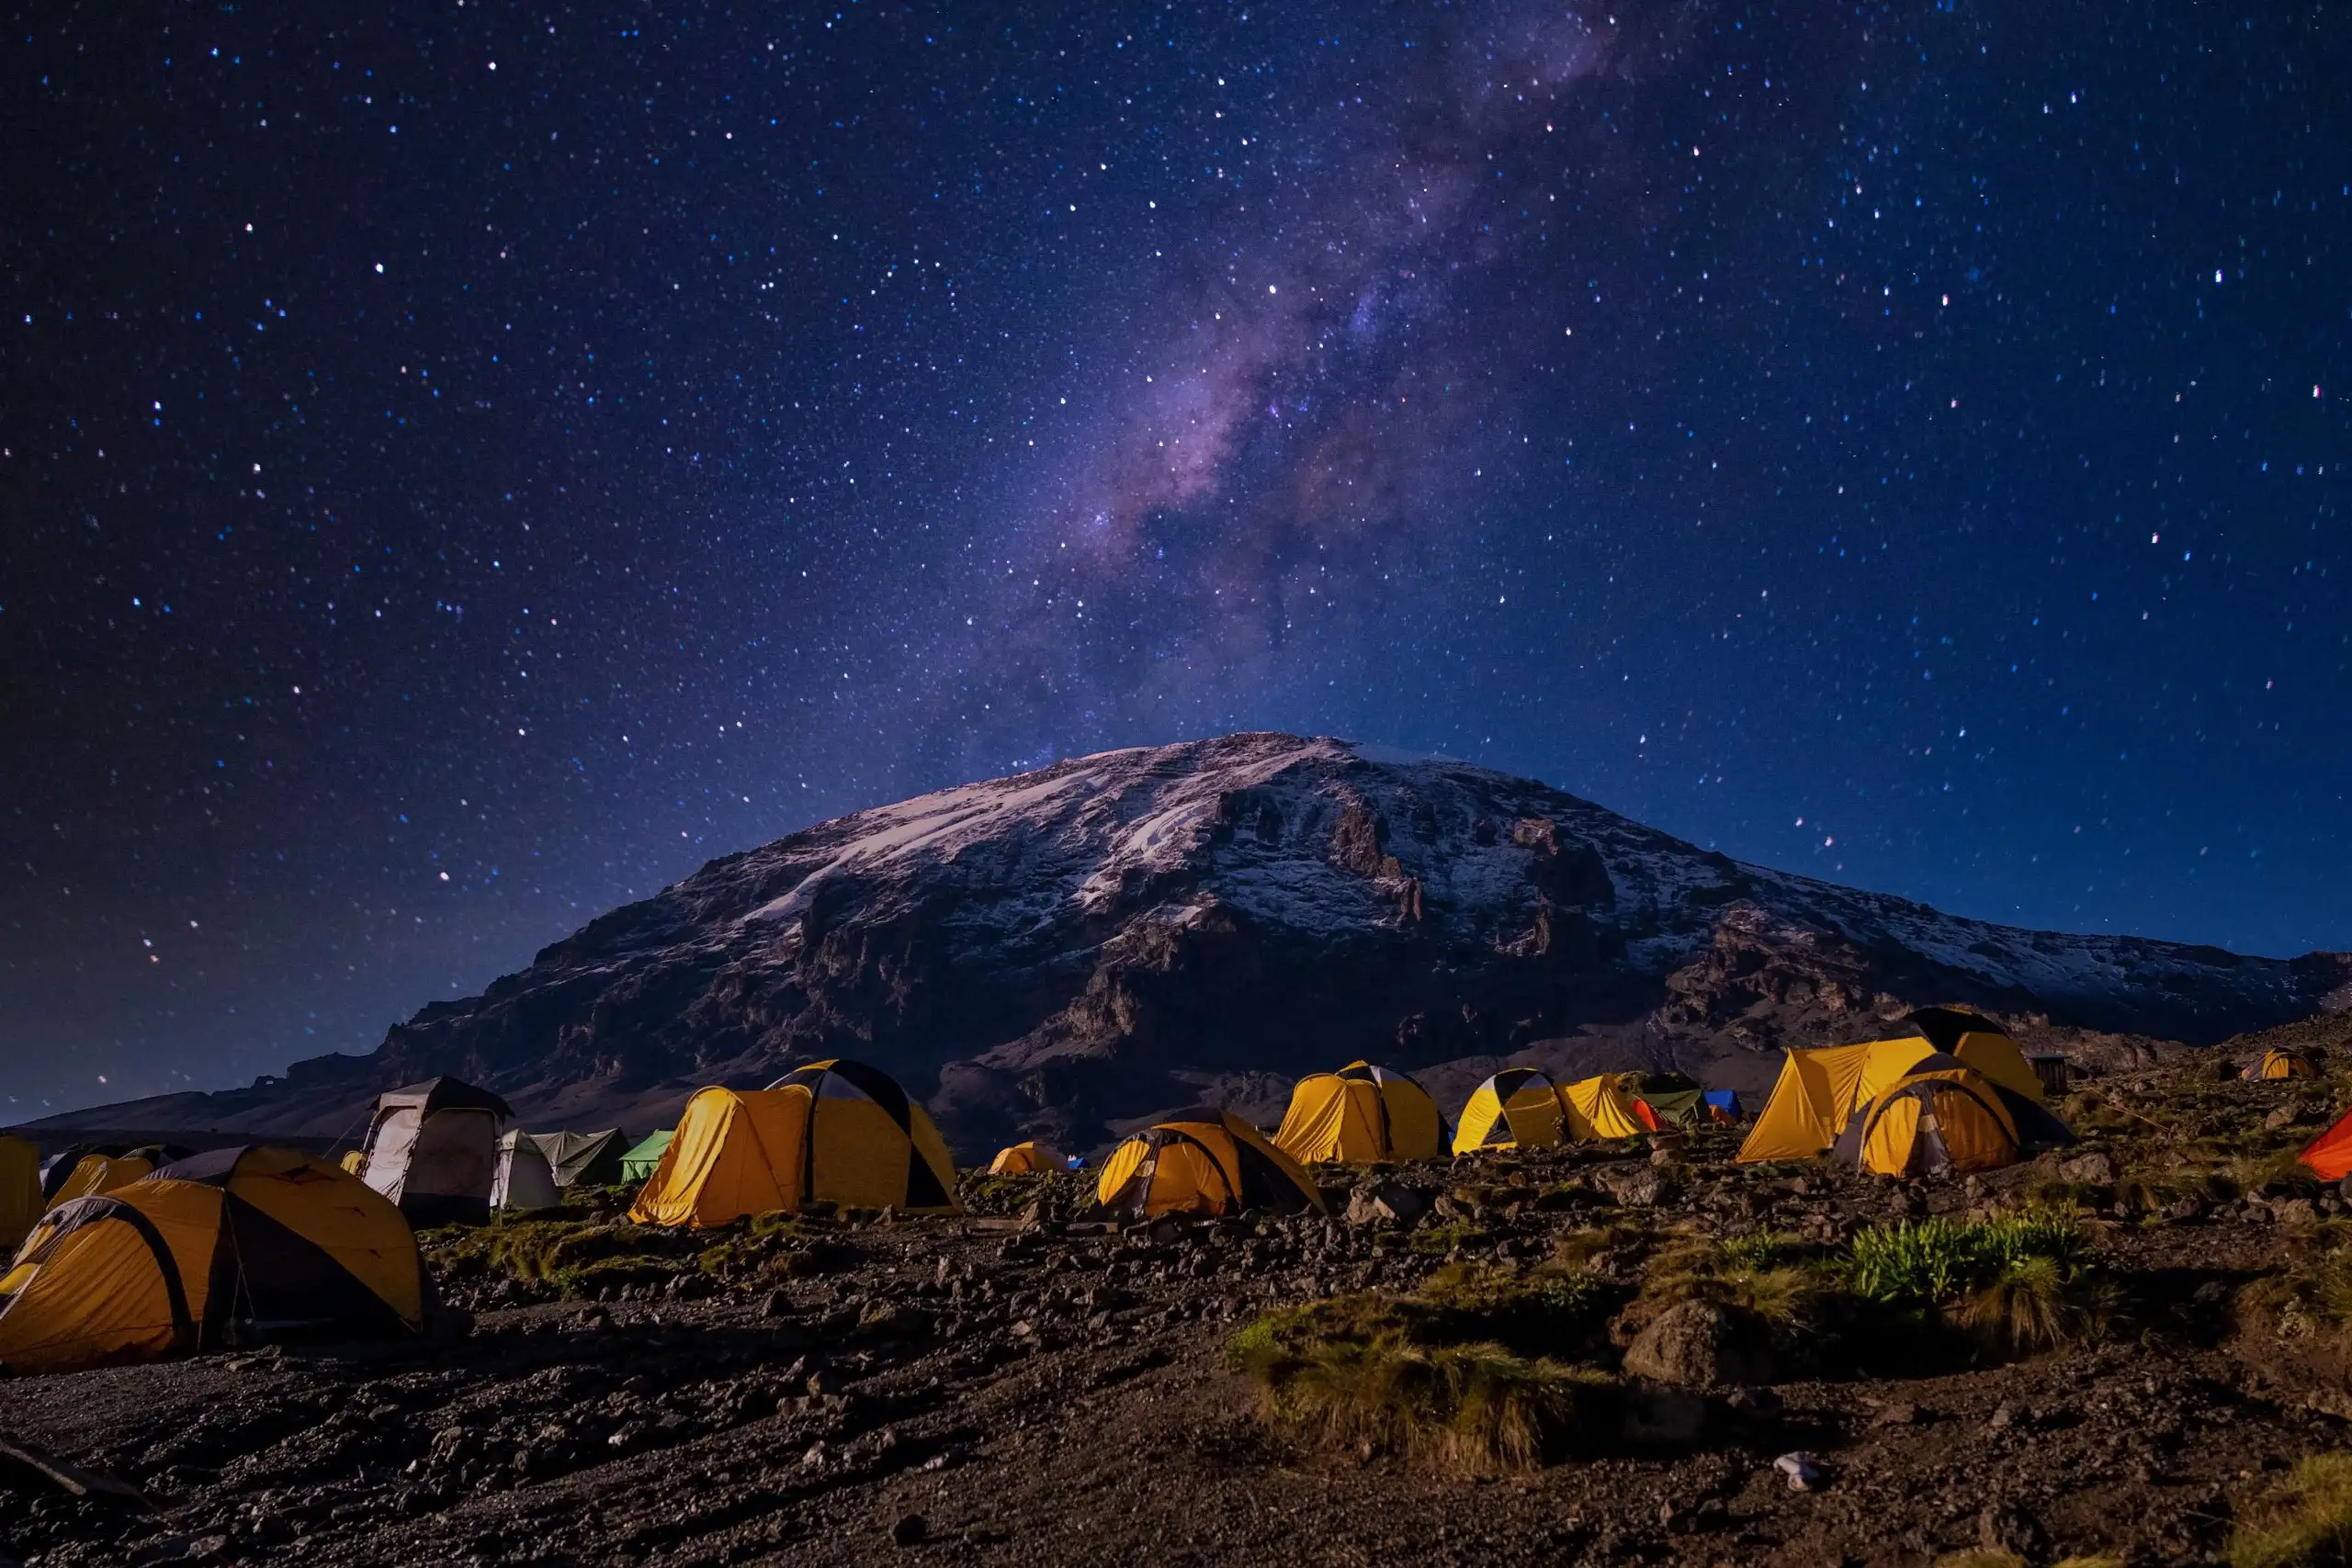 Climbing Kilimanjaro - Summit Mount Kilimanjaro, Luxury Kilimanjaro Climb Tours, Mount Kilimanjaro's Amazing Range Of Climates, Why Do Climbers Summit Kilimanjaro at Night? Searching for the best sleeping pad for climbing Kilimanjaro? Discover top-rated sleeping pads and expert insights for a comfortable mountain adventure. Why We Recommend Crampons For Every Kilimanjaro Trek, Can I Climb Kilimanjaro With No Training?, Climbing Kilimanjaro Success Rates by Routes, Things You Must Do To Make It Up Kilimanjaro, Kilimanjaro National Park, What Celebrities Have Climbed Kilimanjaro? Why Choose Northern Circuit Route for Your Kilimanjaro Climb, Diamox, Climbing Kilimanjaro in August, Climbing Kilimanjaro in February, Are K2 and Kilimanjaro the Same Mountain?, Walk-In Tents: Wrong For Kilimanjaro, What Wild Animals Will I See Climbing Kilimanjaro?